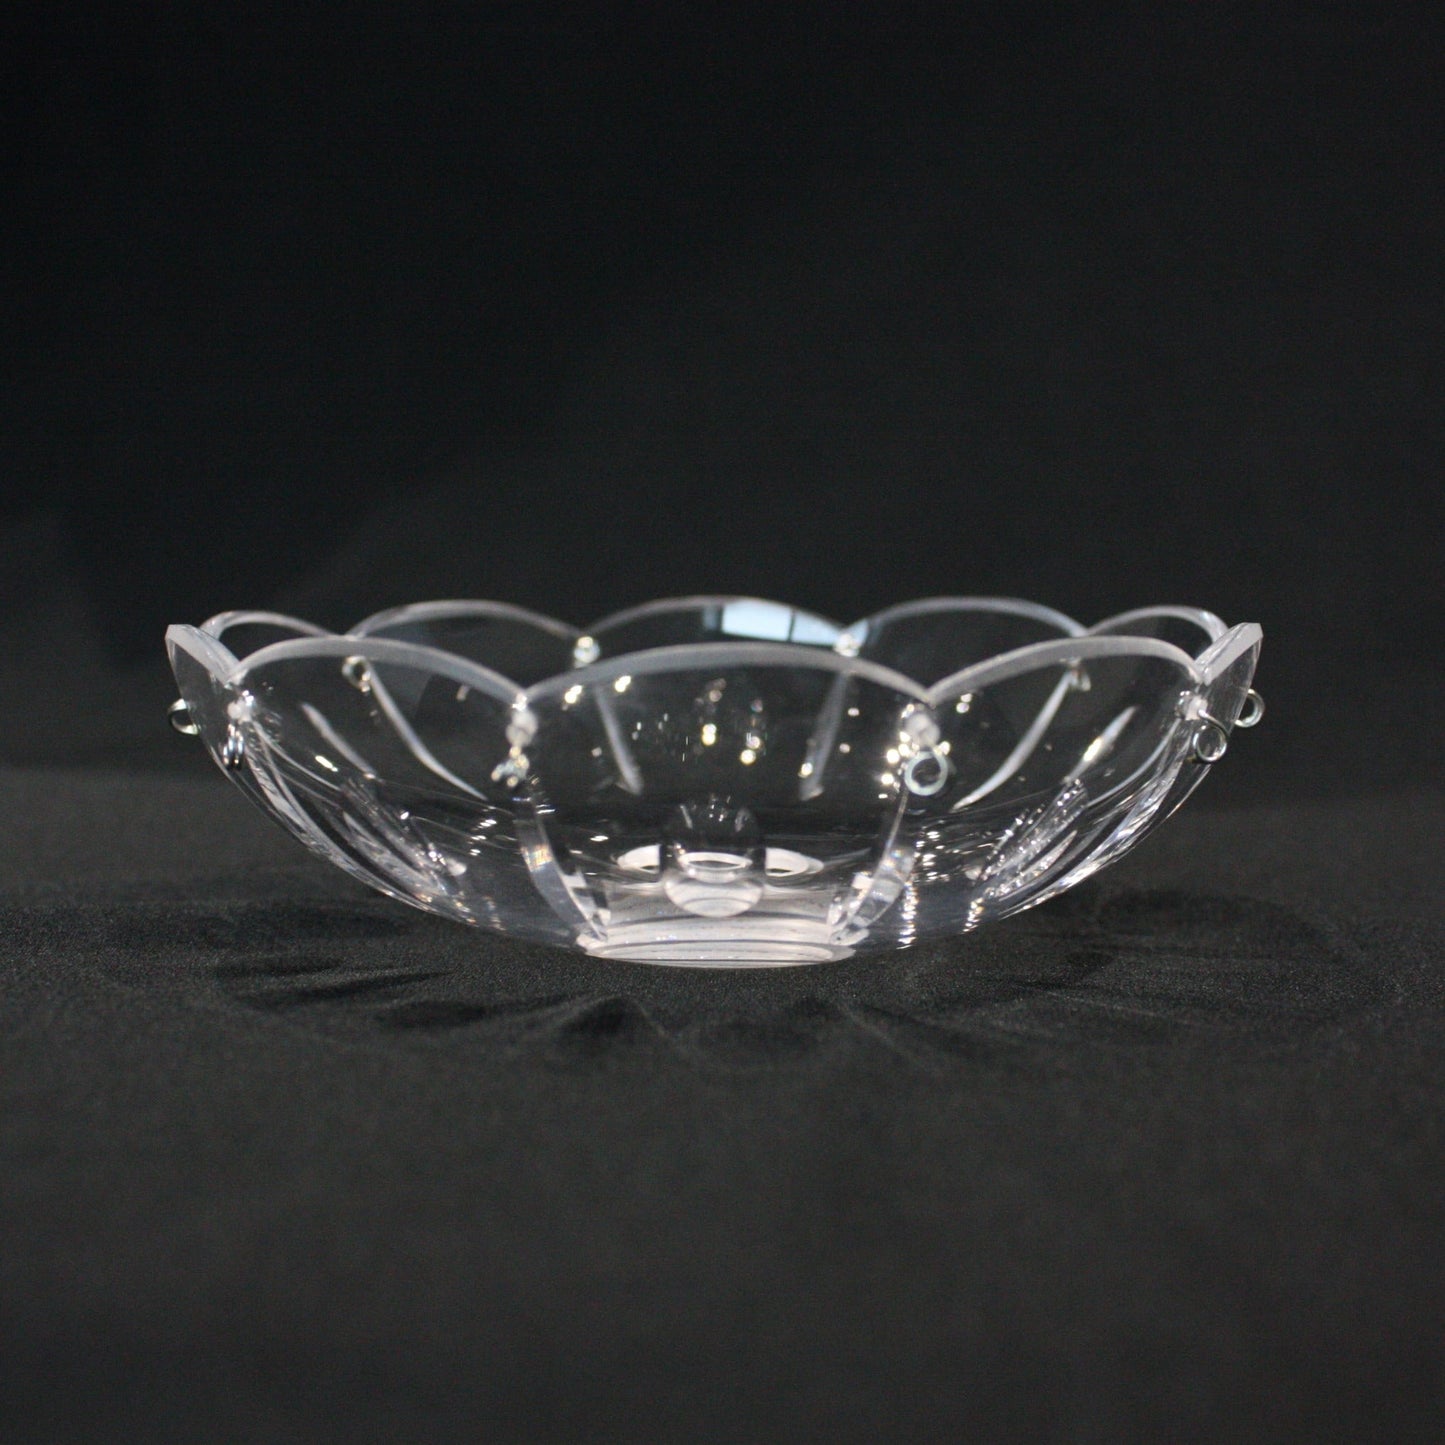 12" 28 Pin Olive & Mitre Cut Czech Crystal Bowl